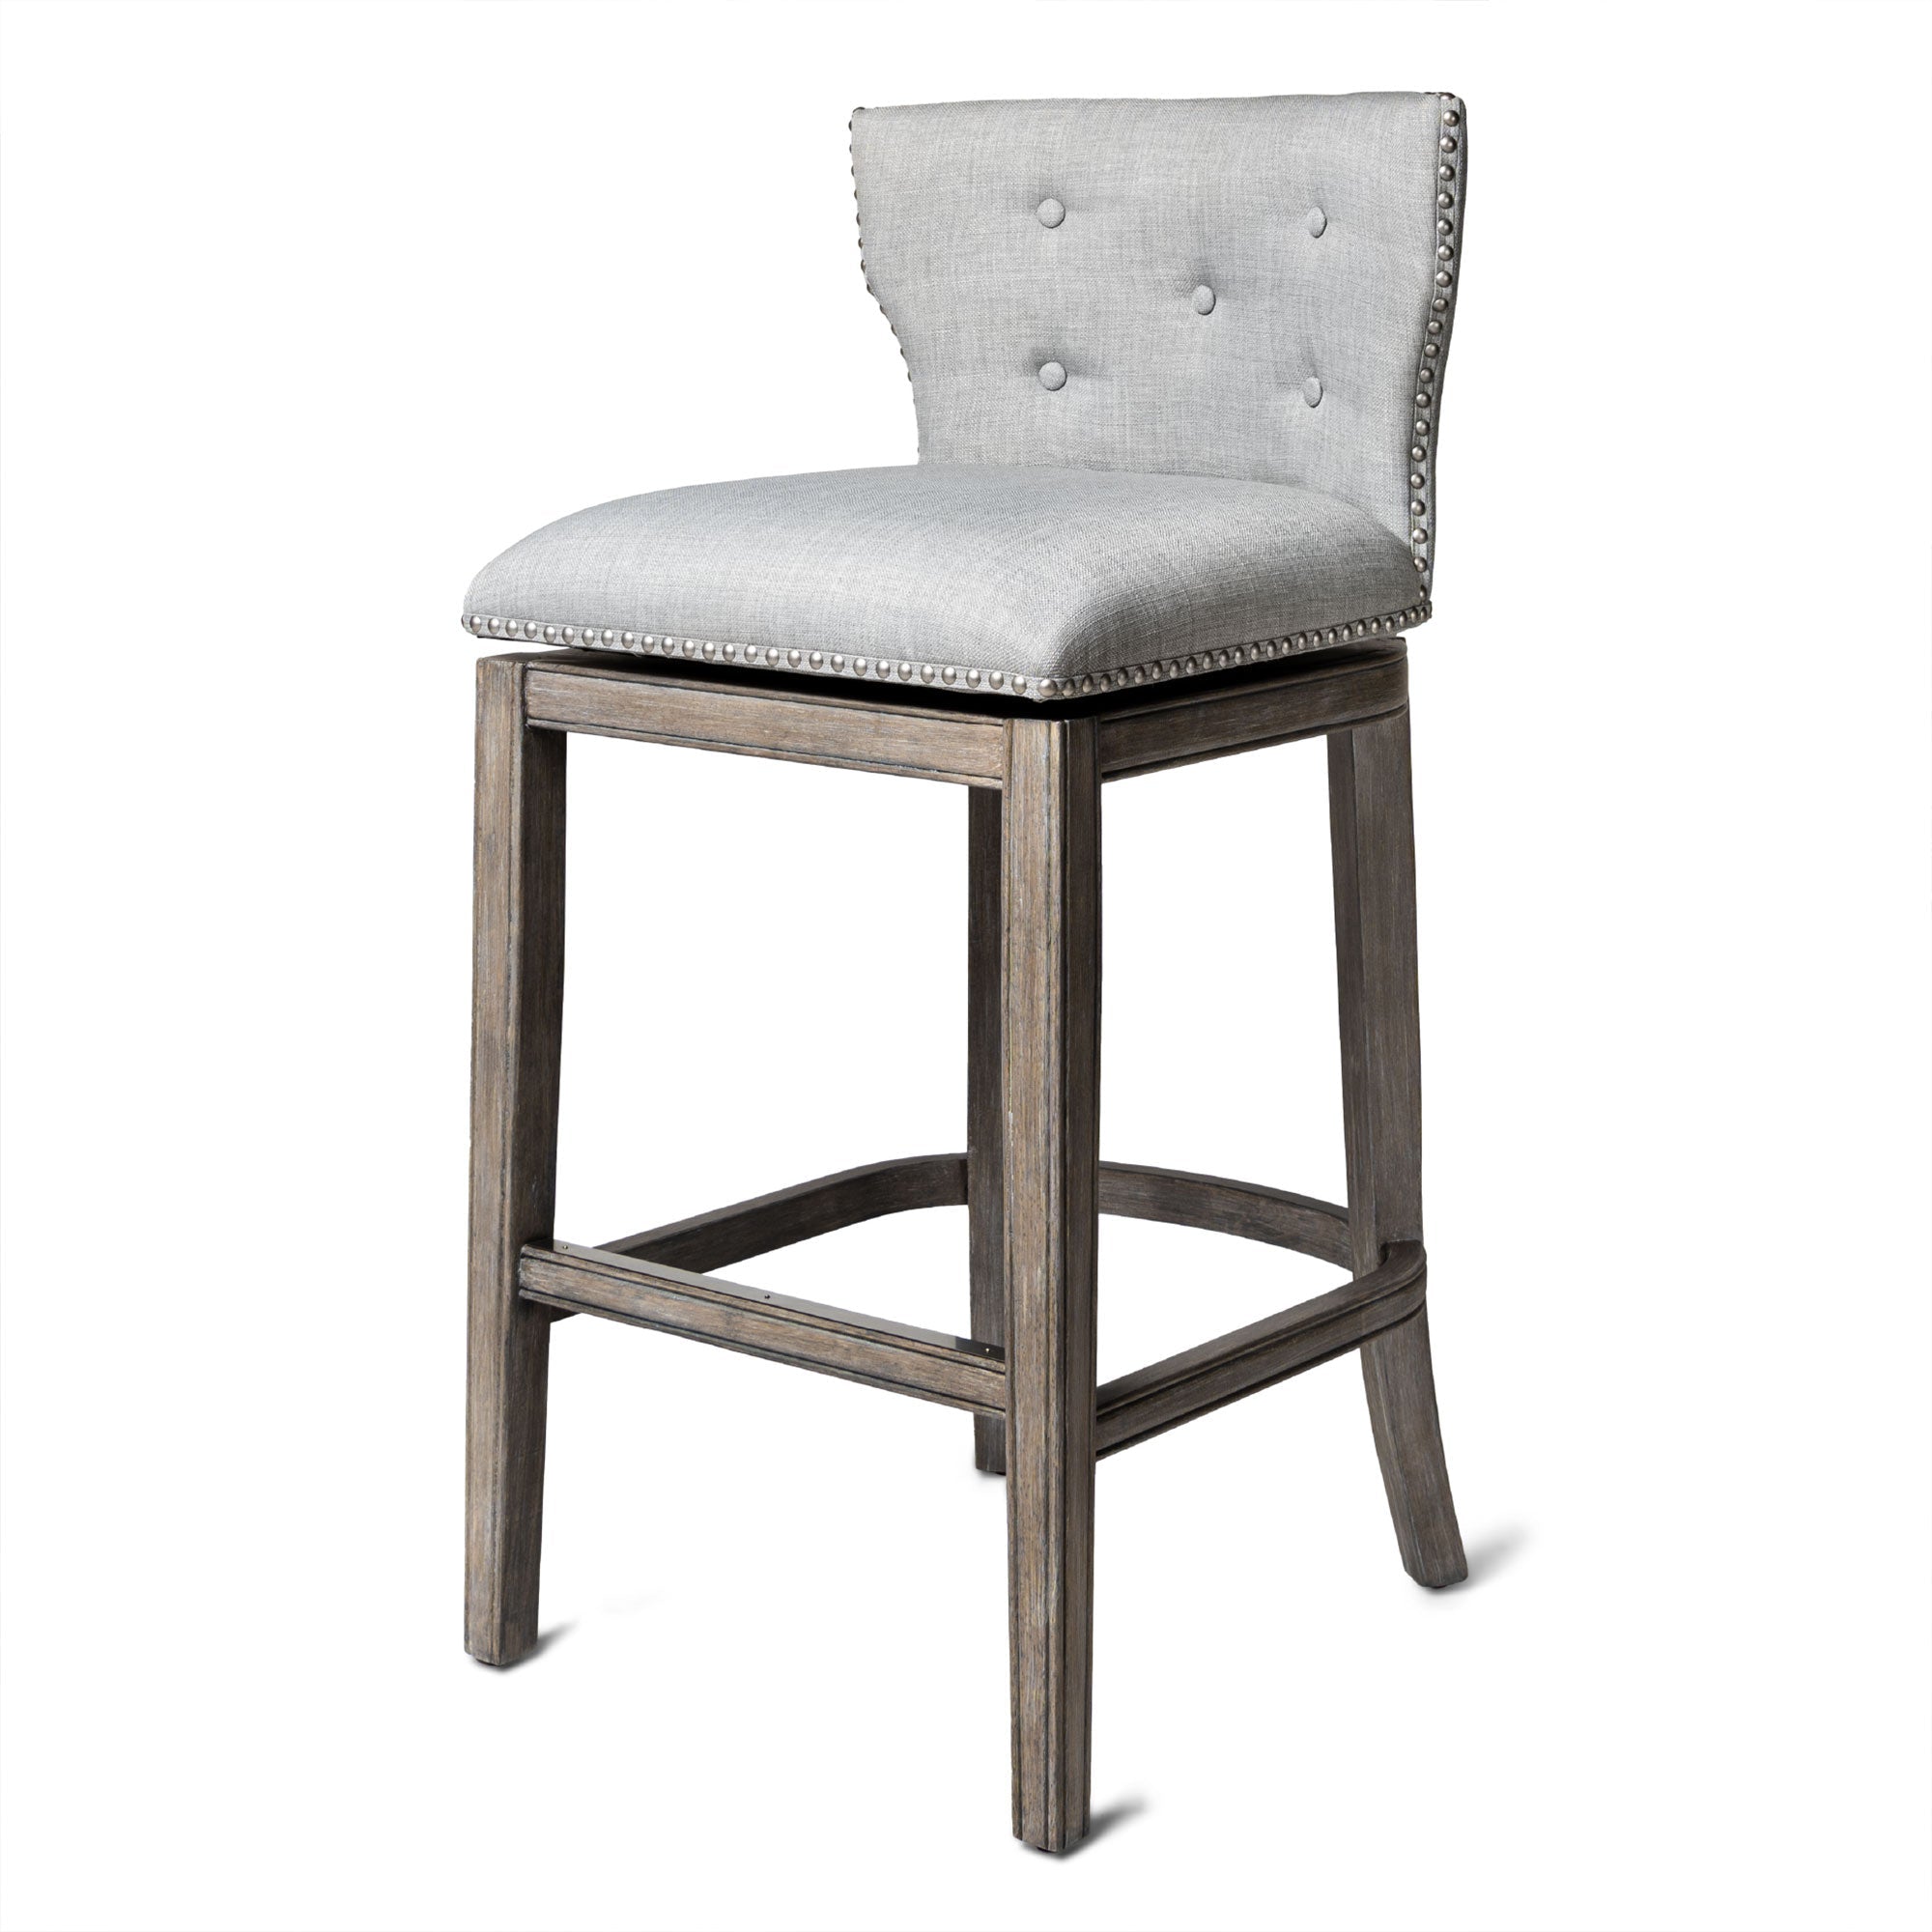 Hugo Bar Stool in Reclaimed Oak Finish with Ash Grey Fabric Upholstery in Stools by Maven Lane